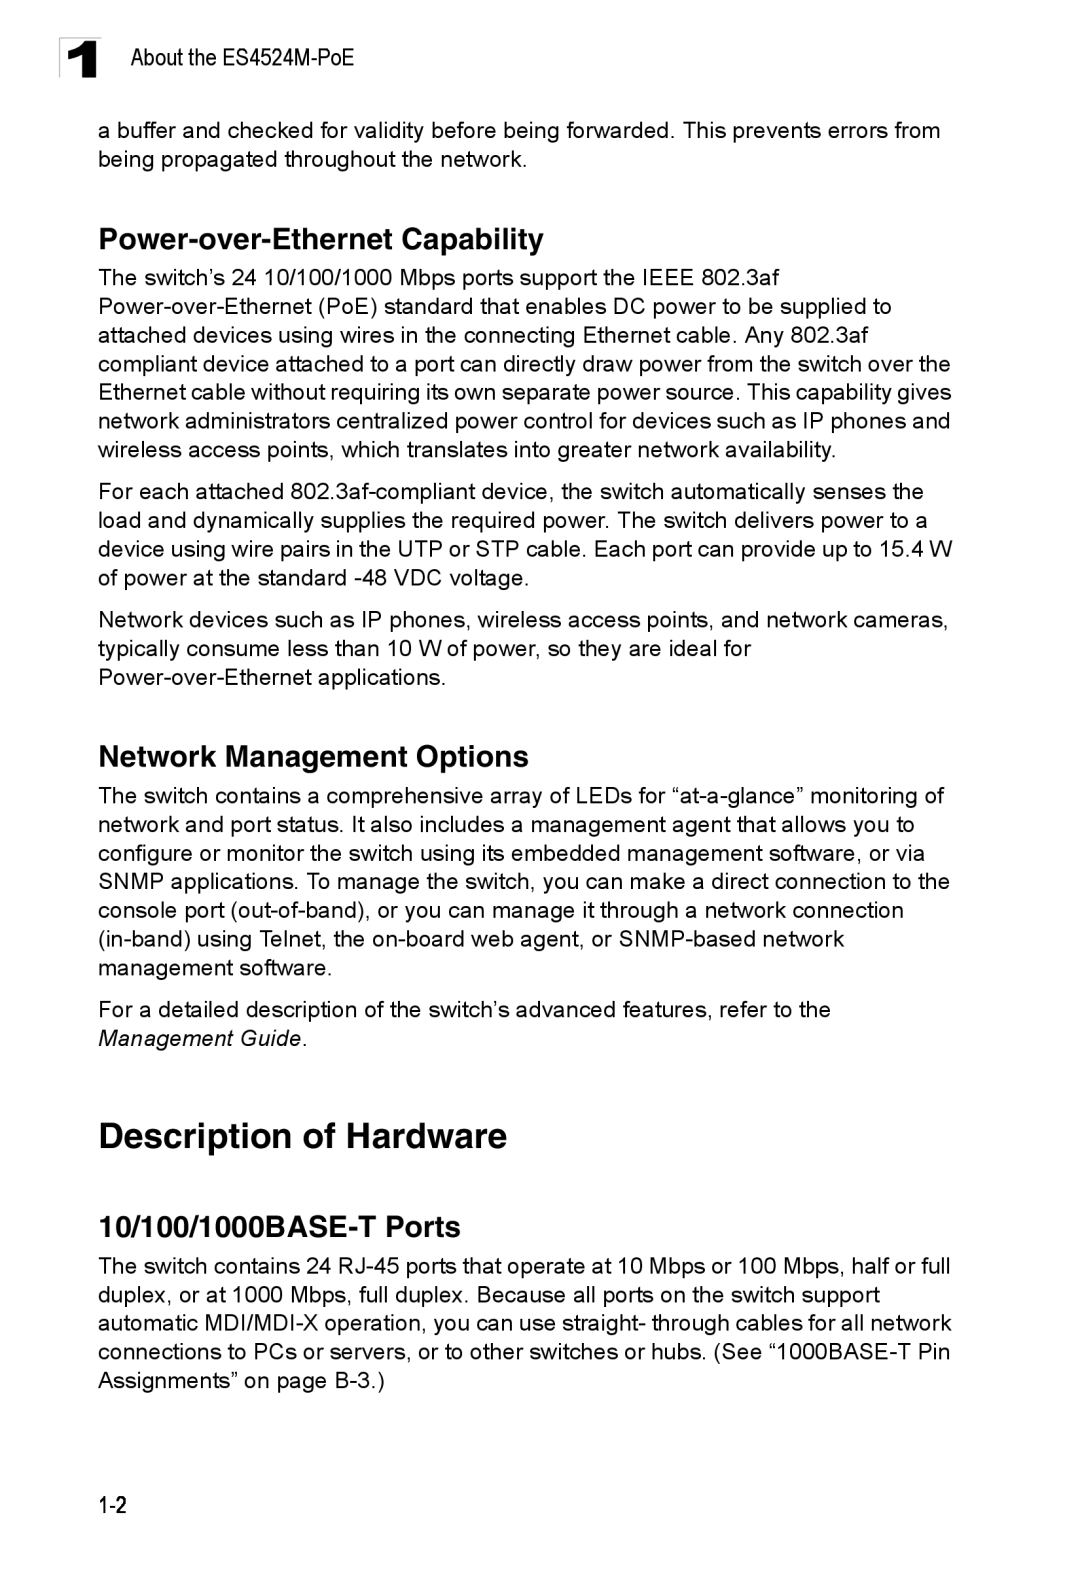 Accton Technology ES4524M-POE manual Description of Hardware, Power-over-Ethernet Capability, Network Management Options 